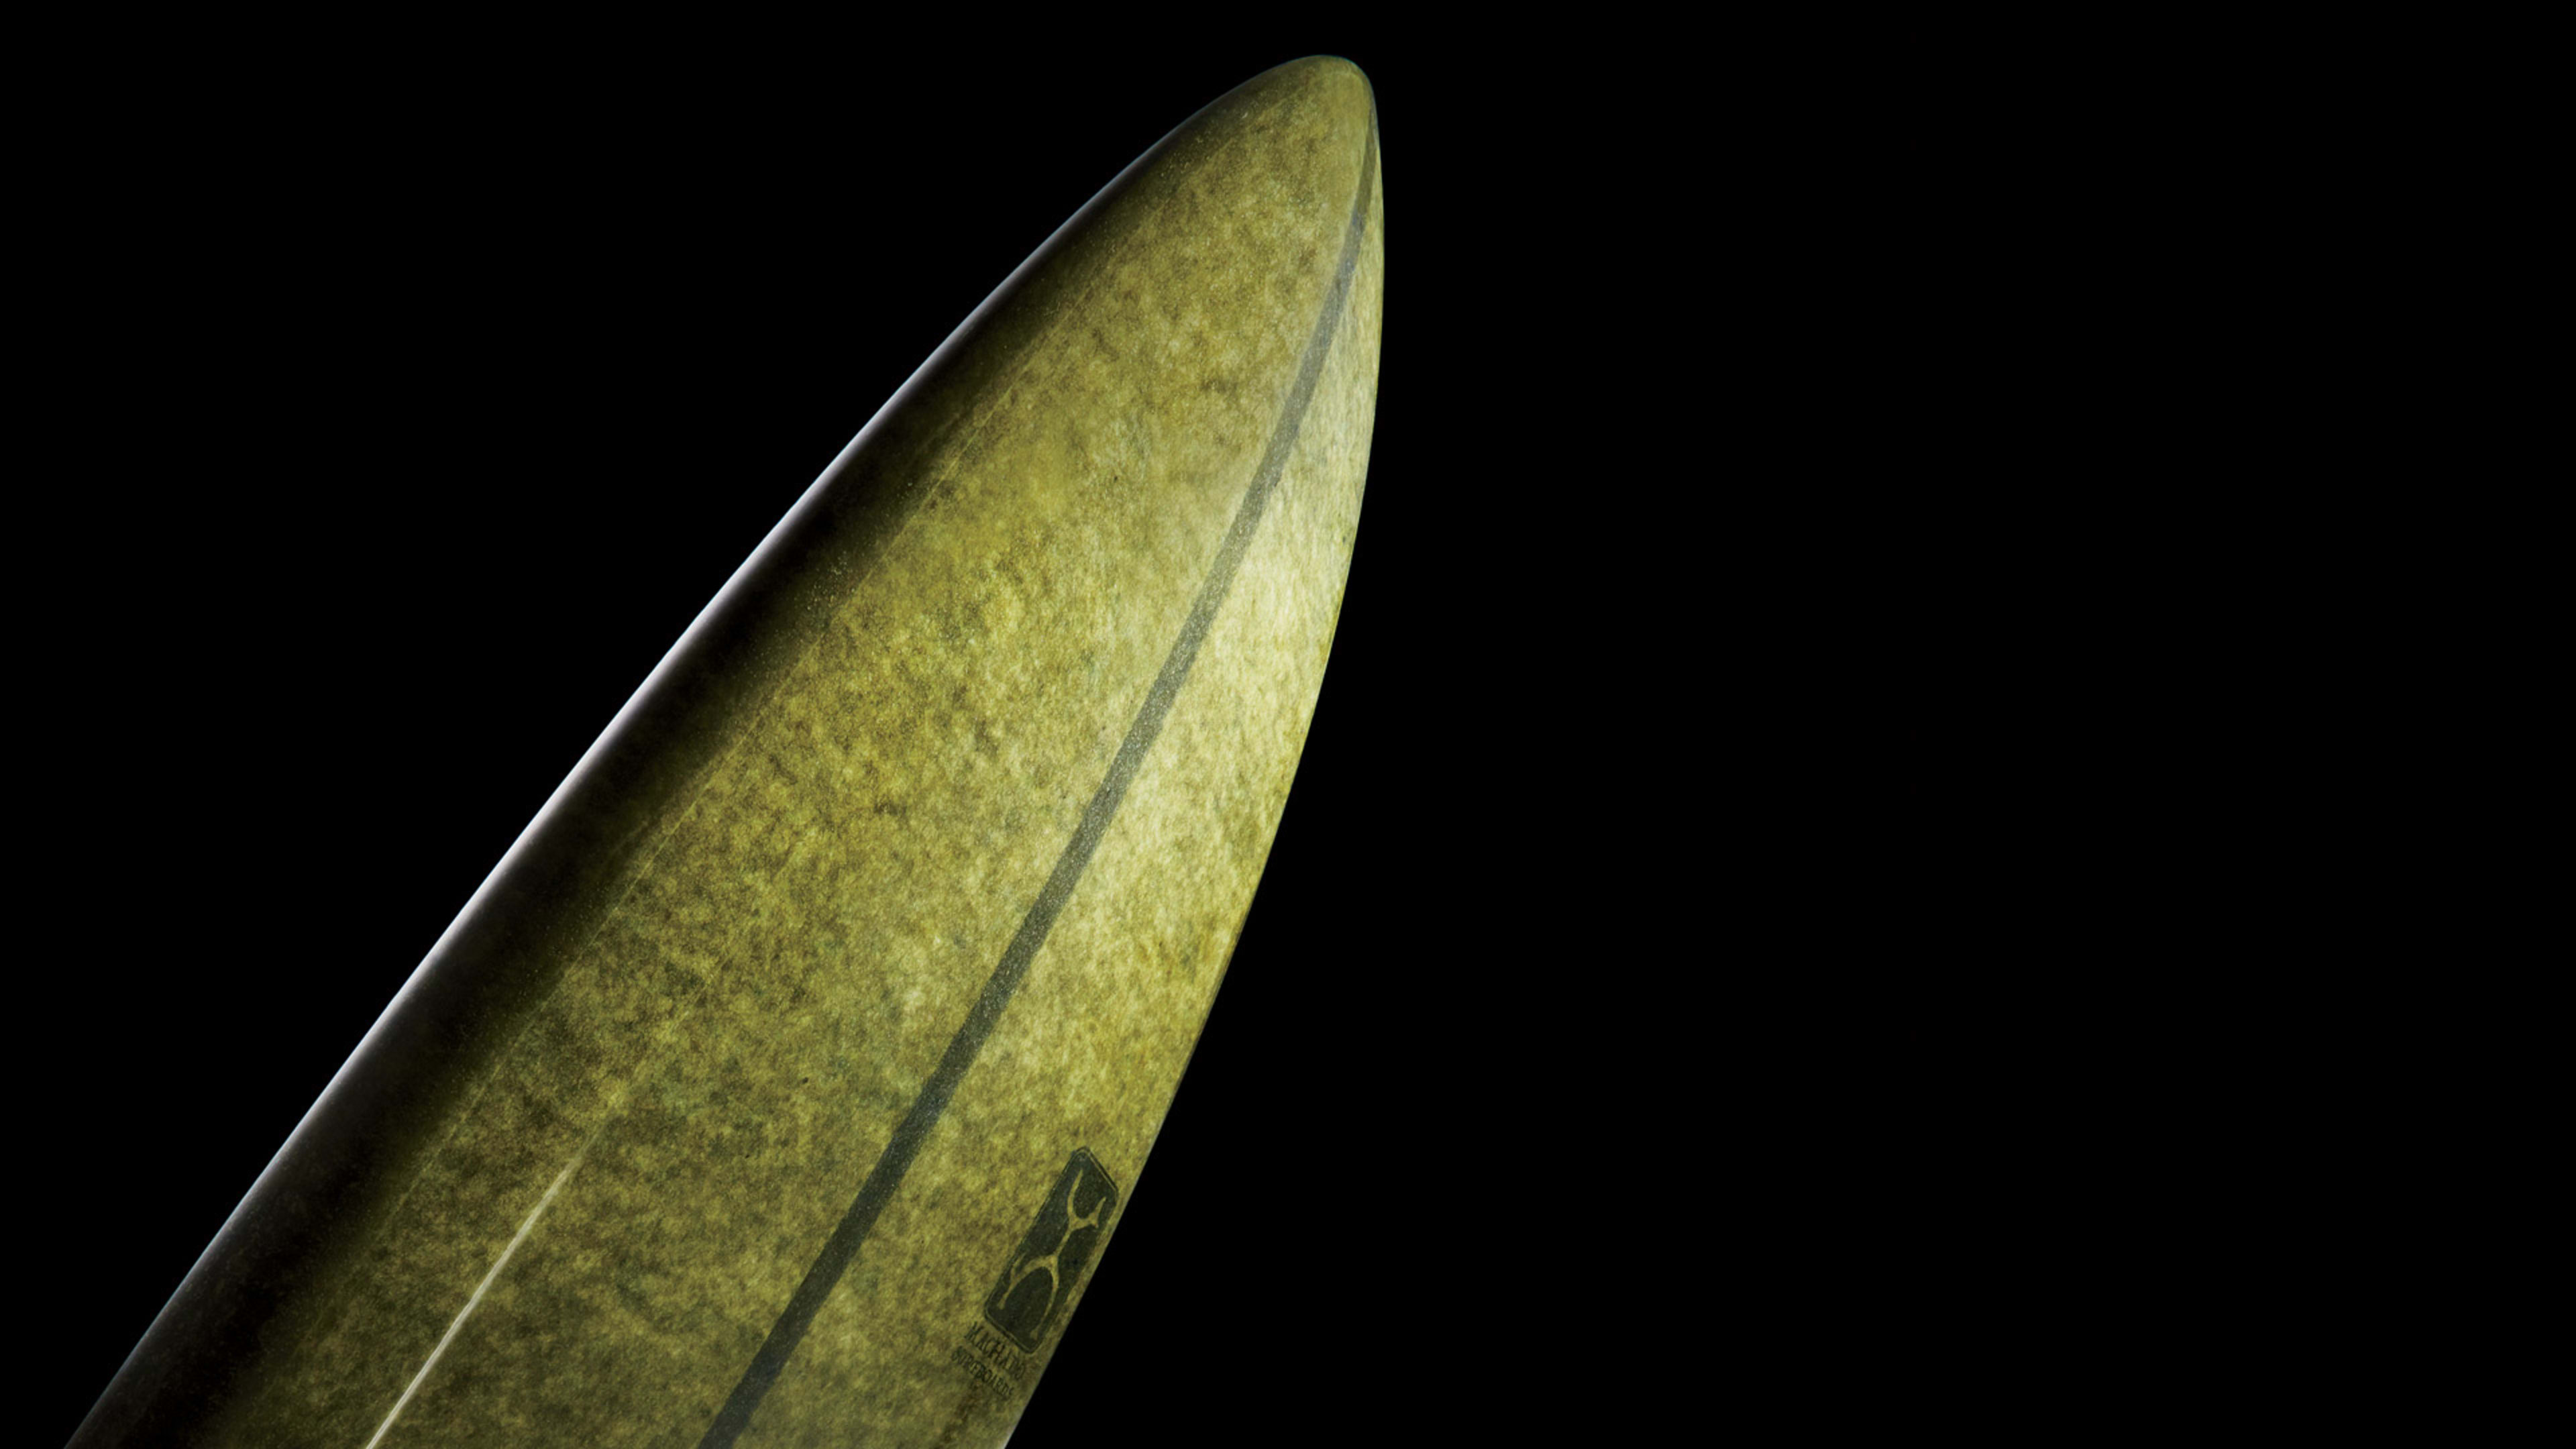 Paul Barron’s wool surfboard is cleaning up surfing